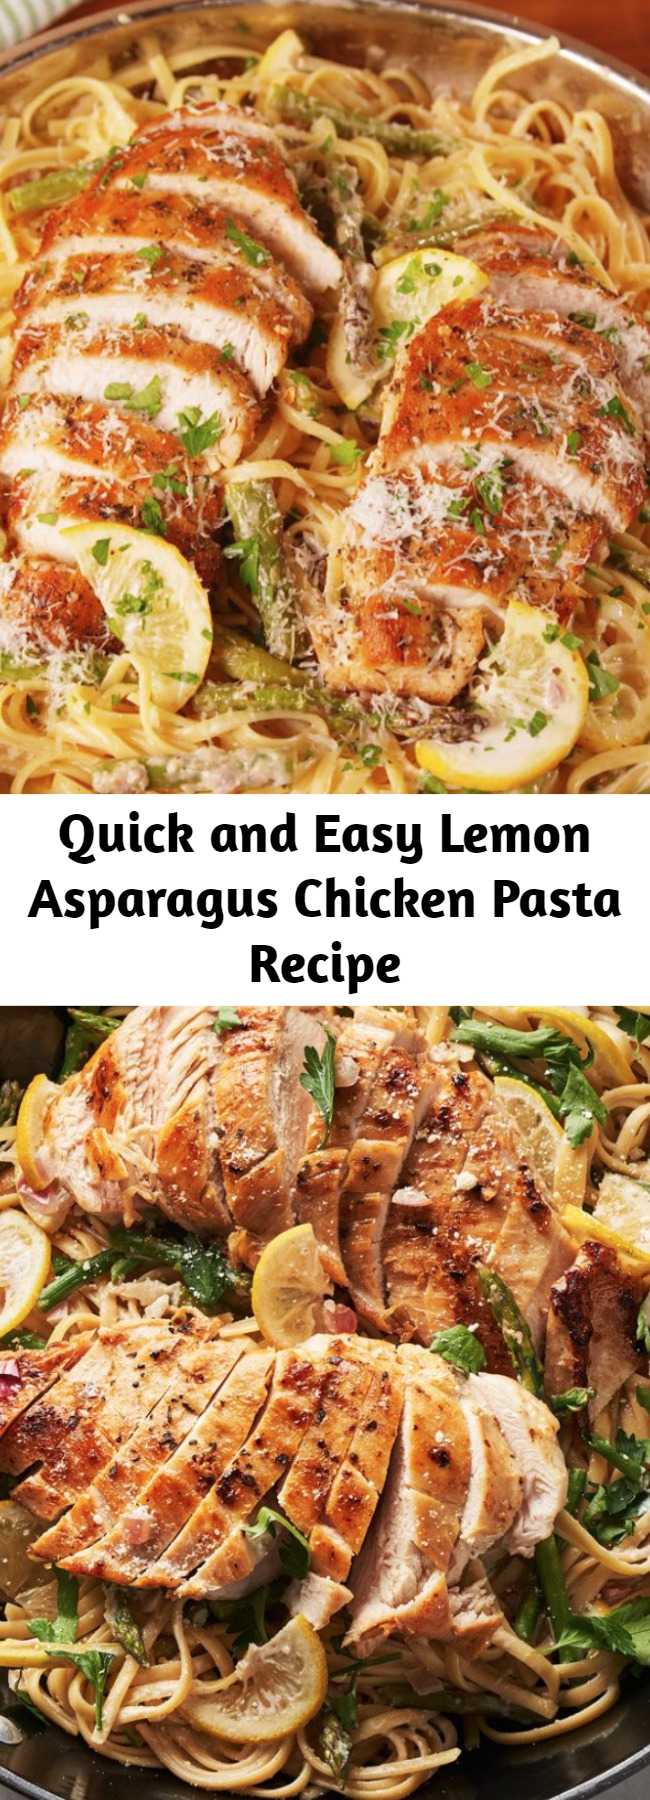 Quick and Easy Lemon Asparagus Chicken Pasta Recipe - This lemon asparagus chicken tastes like spring in the best of ways. #creamy #sauce #dinner #linguine #pasta #chicken #parmesan #asparagus #spring #veggies #onepot #lemon #quick